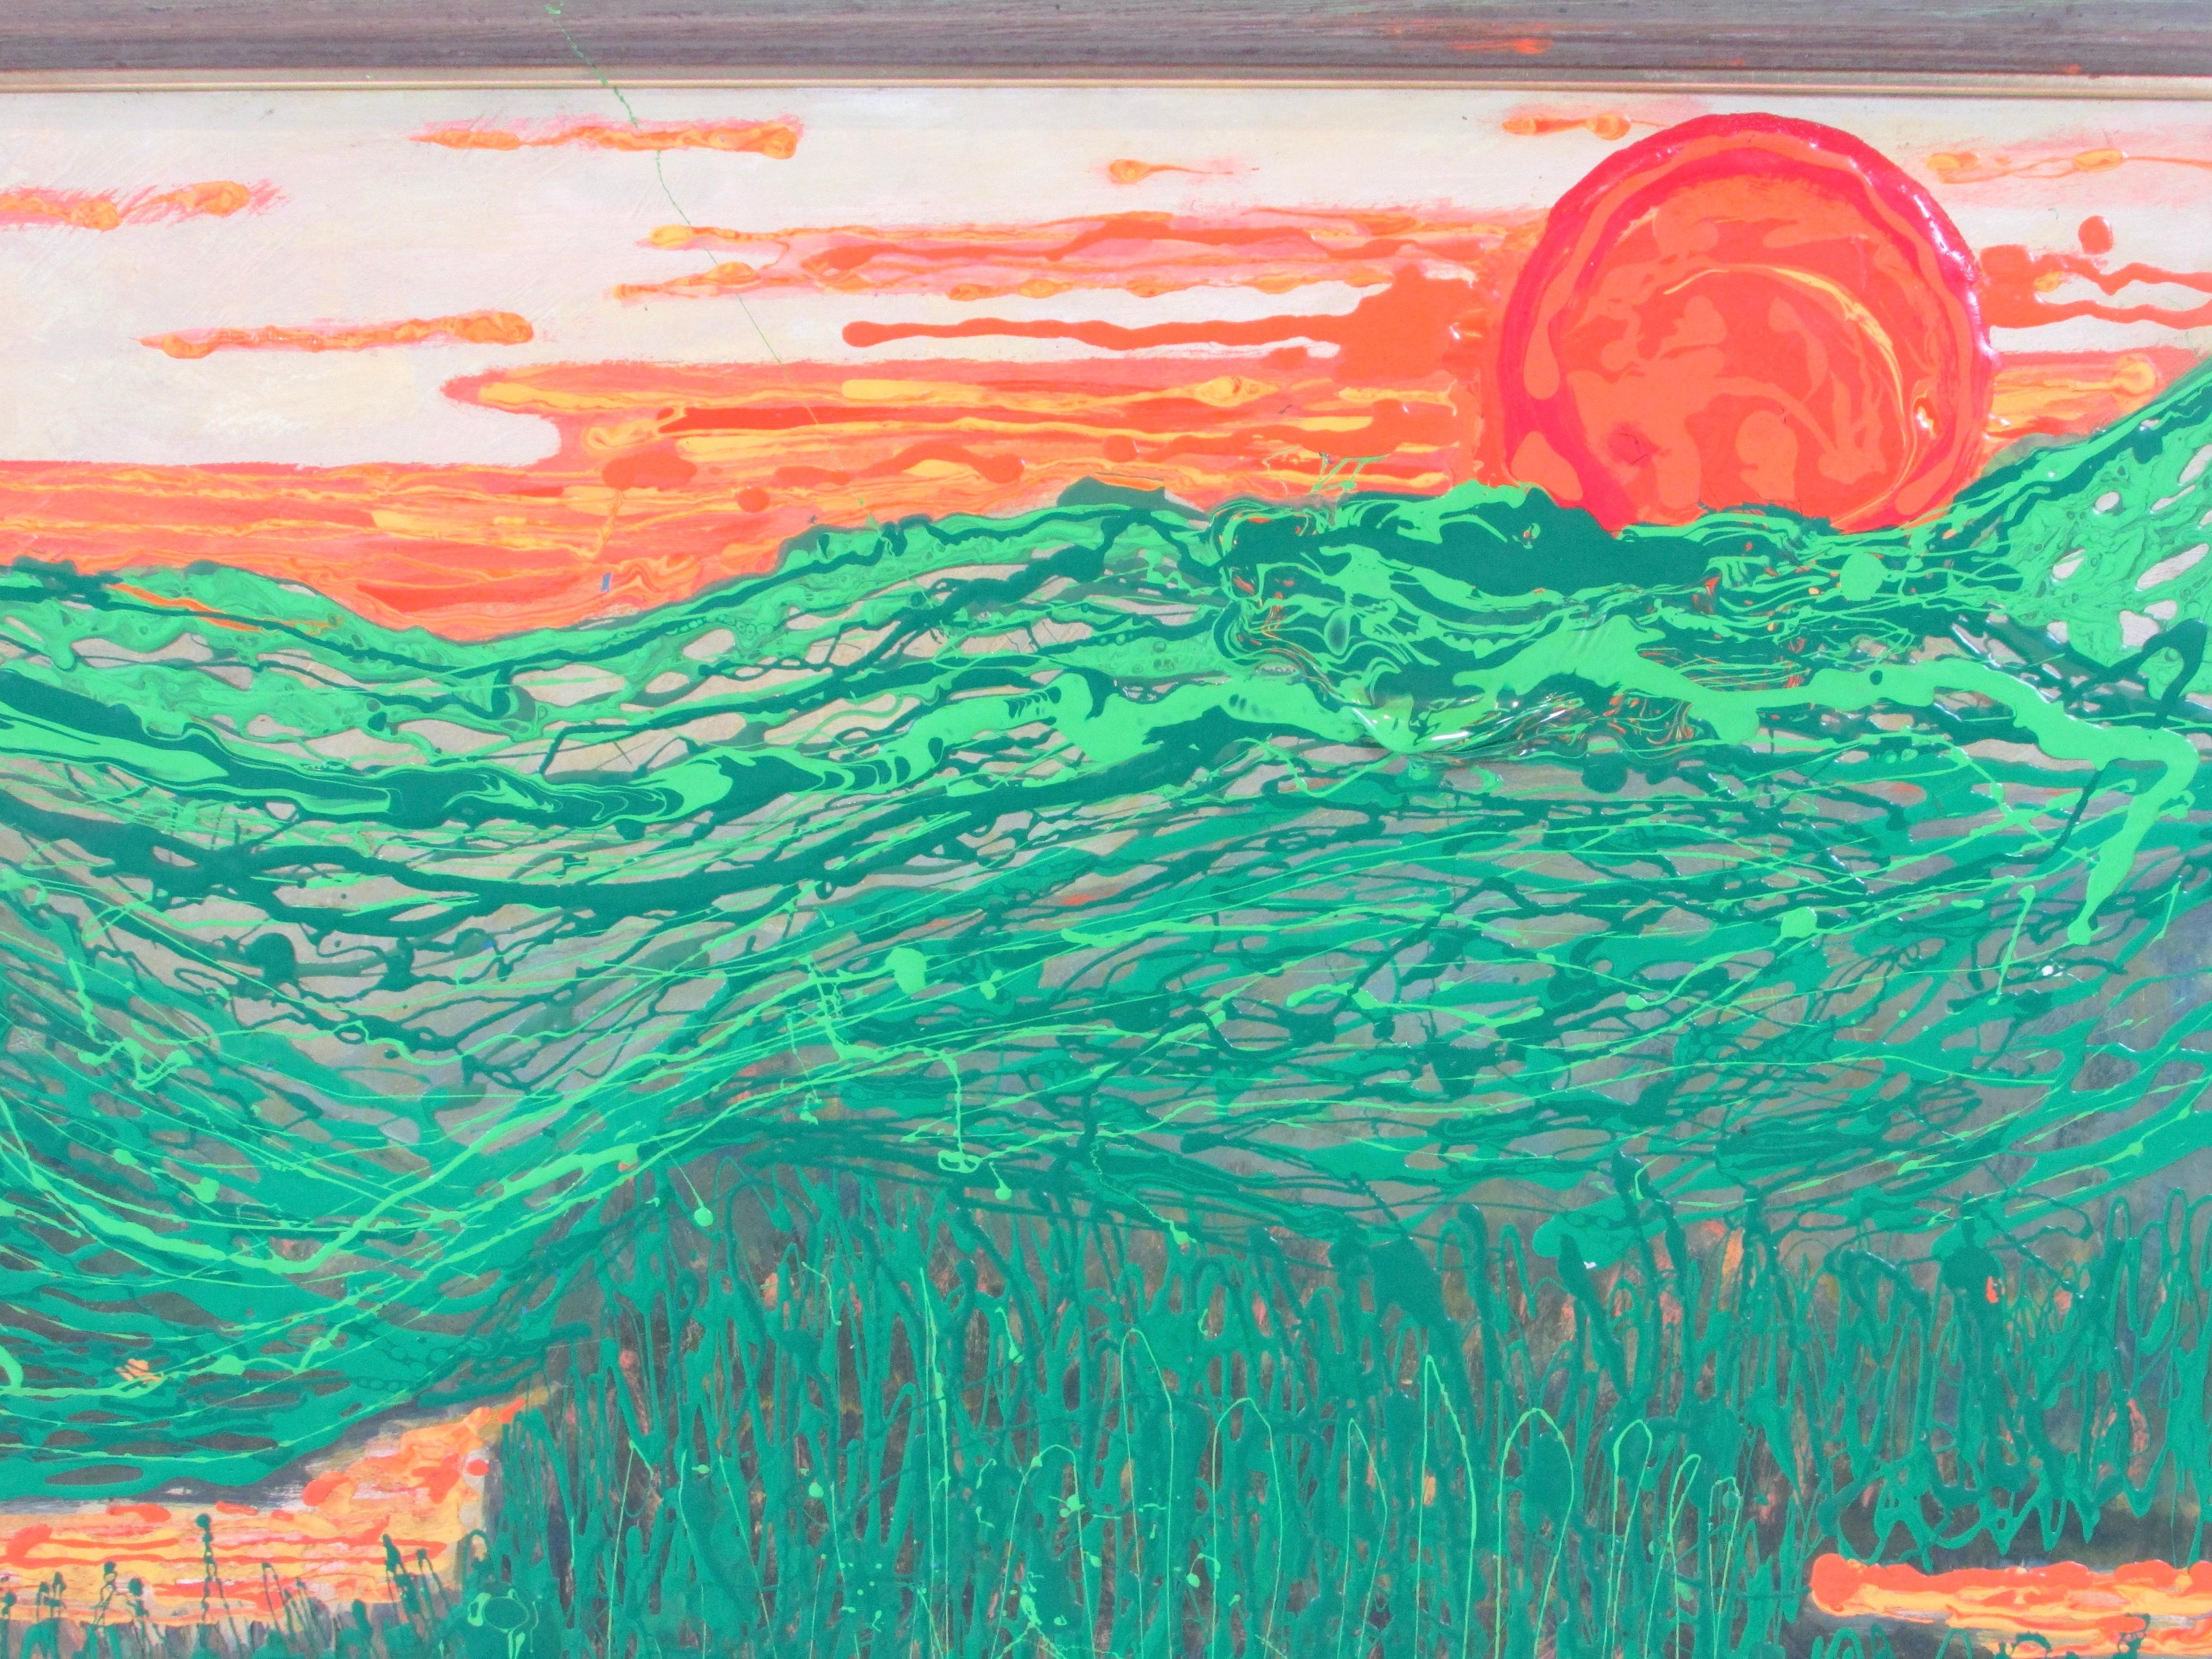 Hand-Painted Max Shaye Textured Acrylic on board painting Orange Sun Over Green Valley For Sale